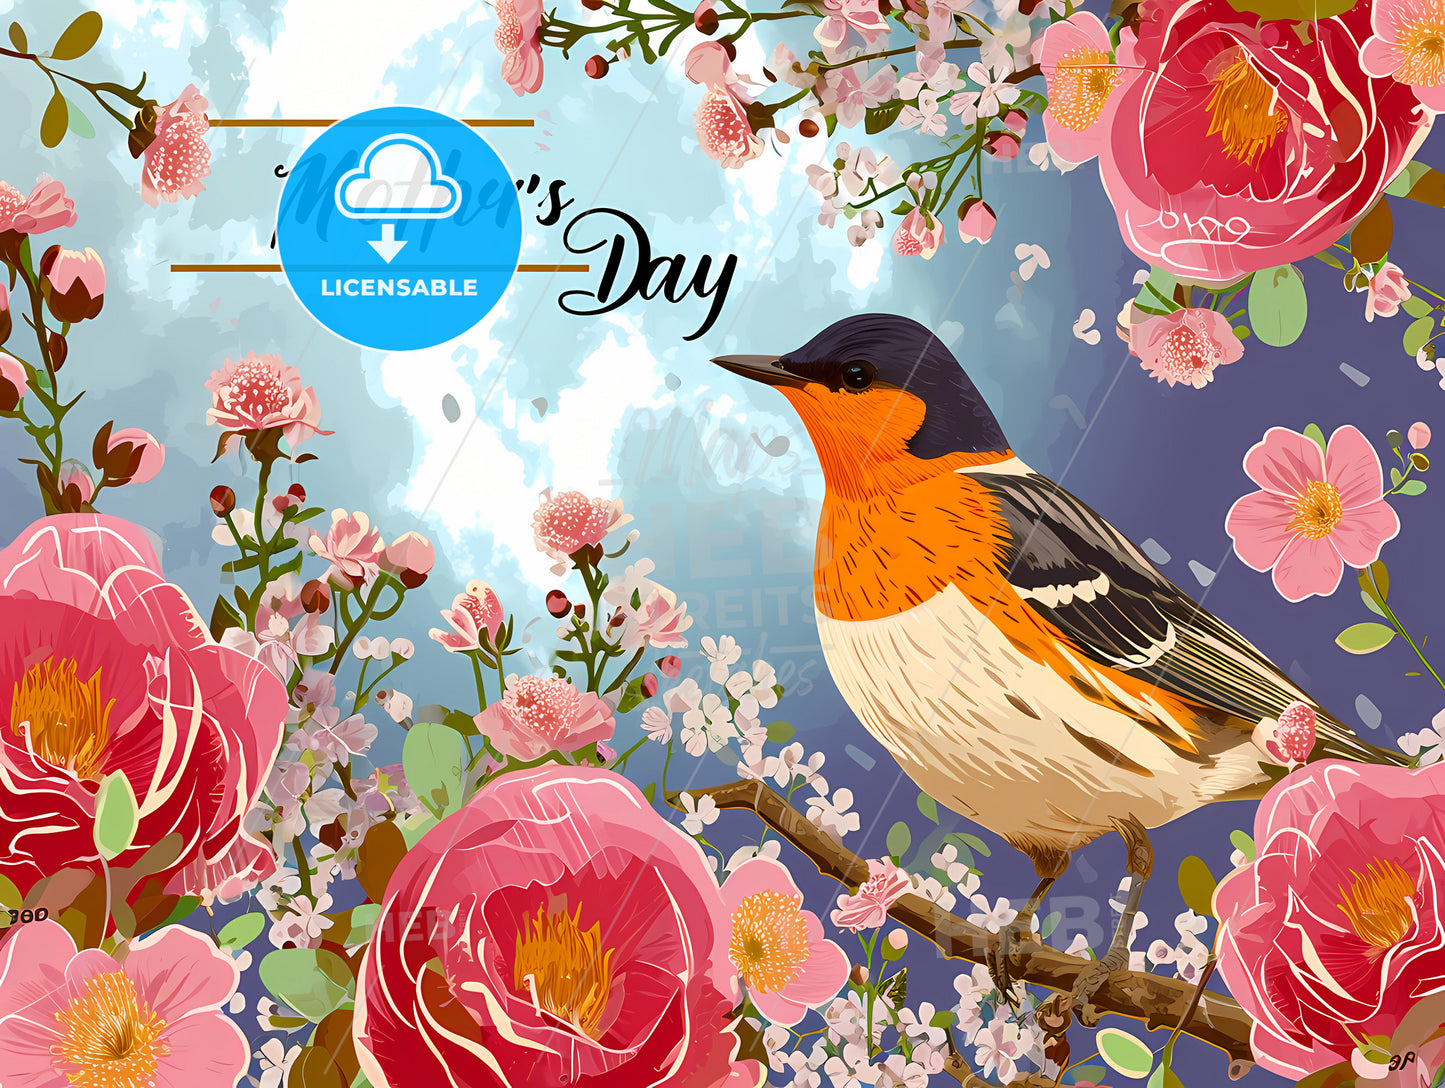 Happy Mothers Day Vector With Flowers, A Bird On A Branch With Flowers